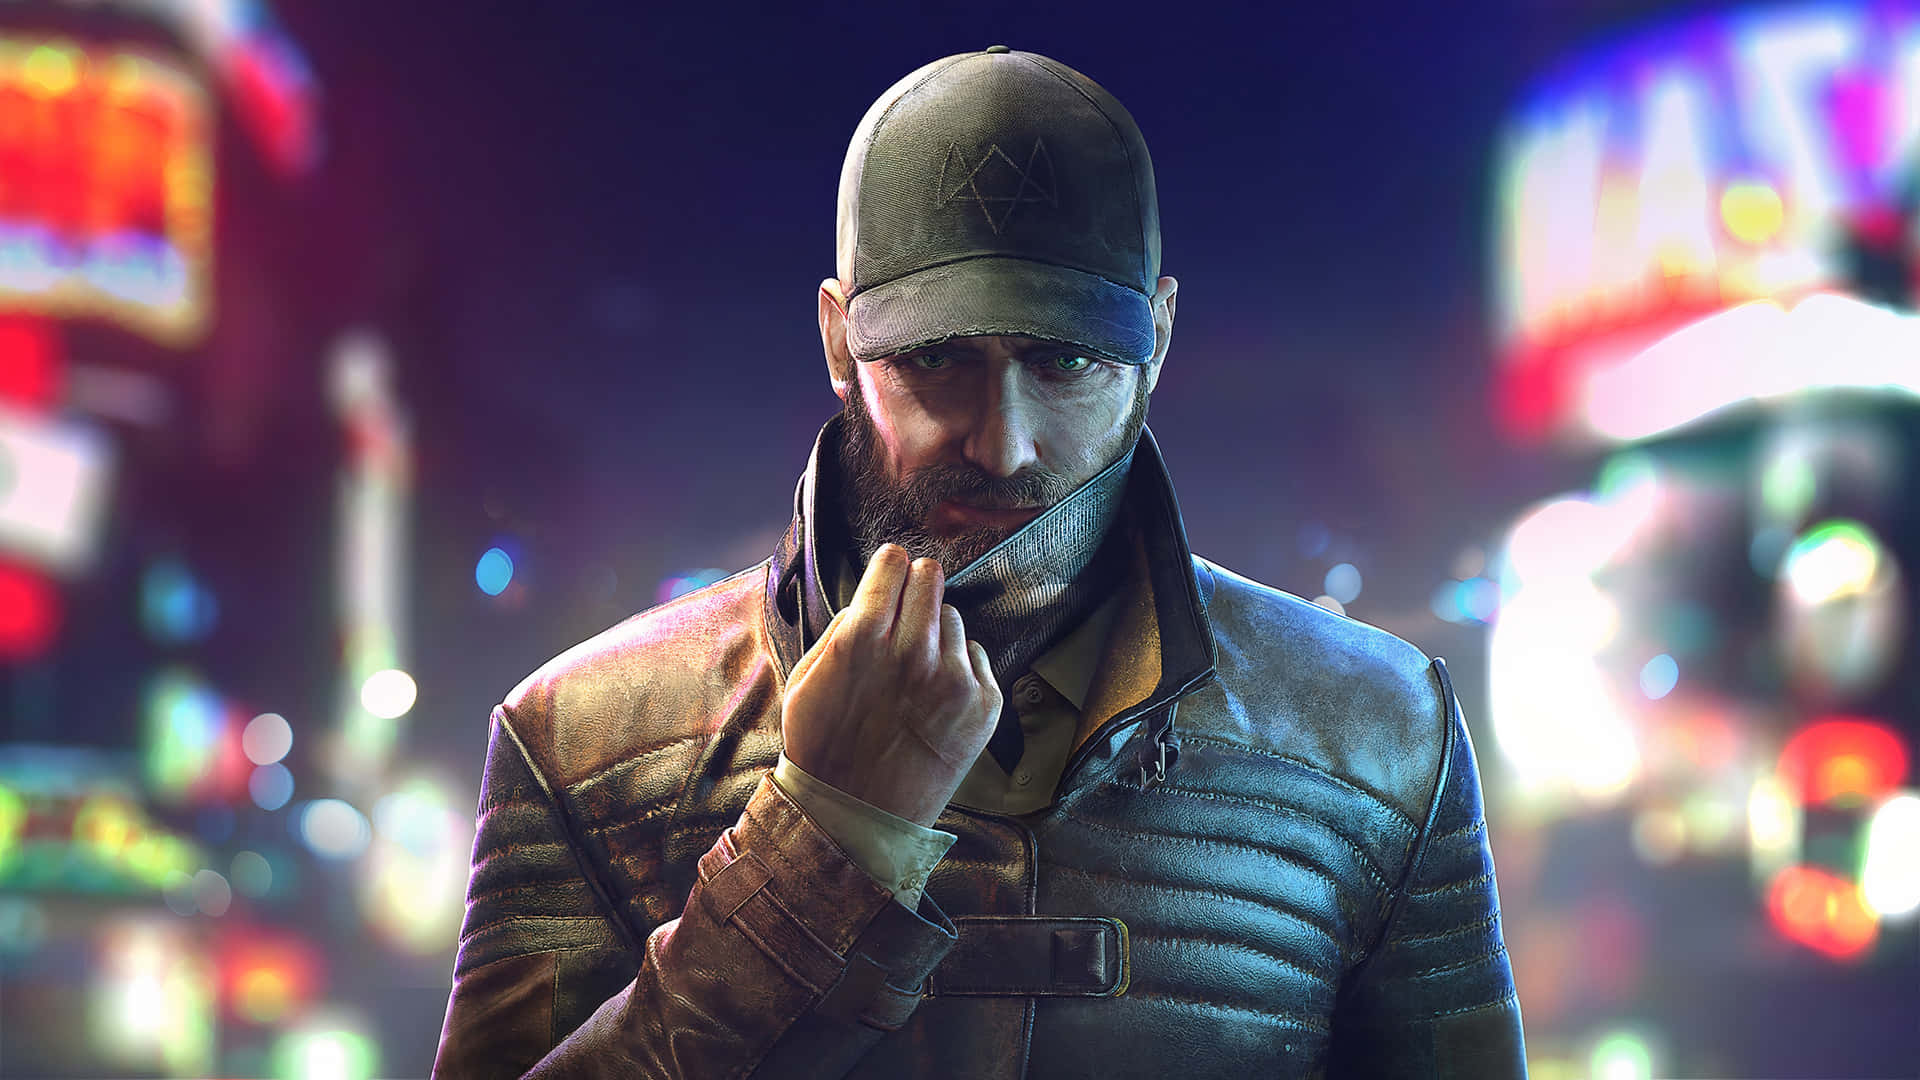 Explore and manipulate the virtual world of Chicago with Watch Dogs Wallpaper